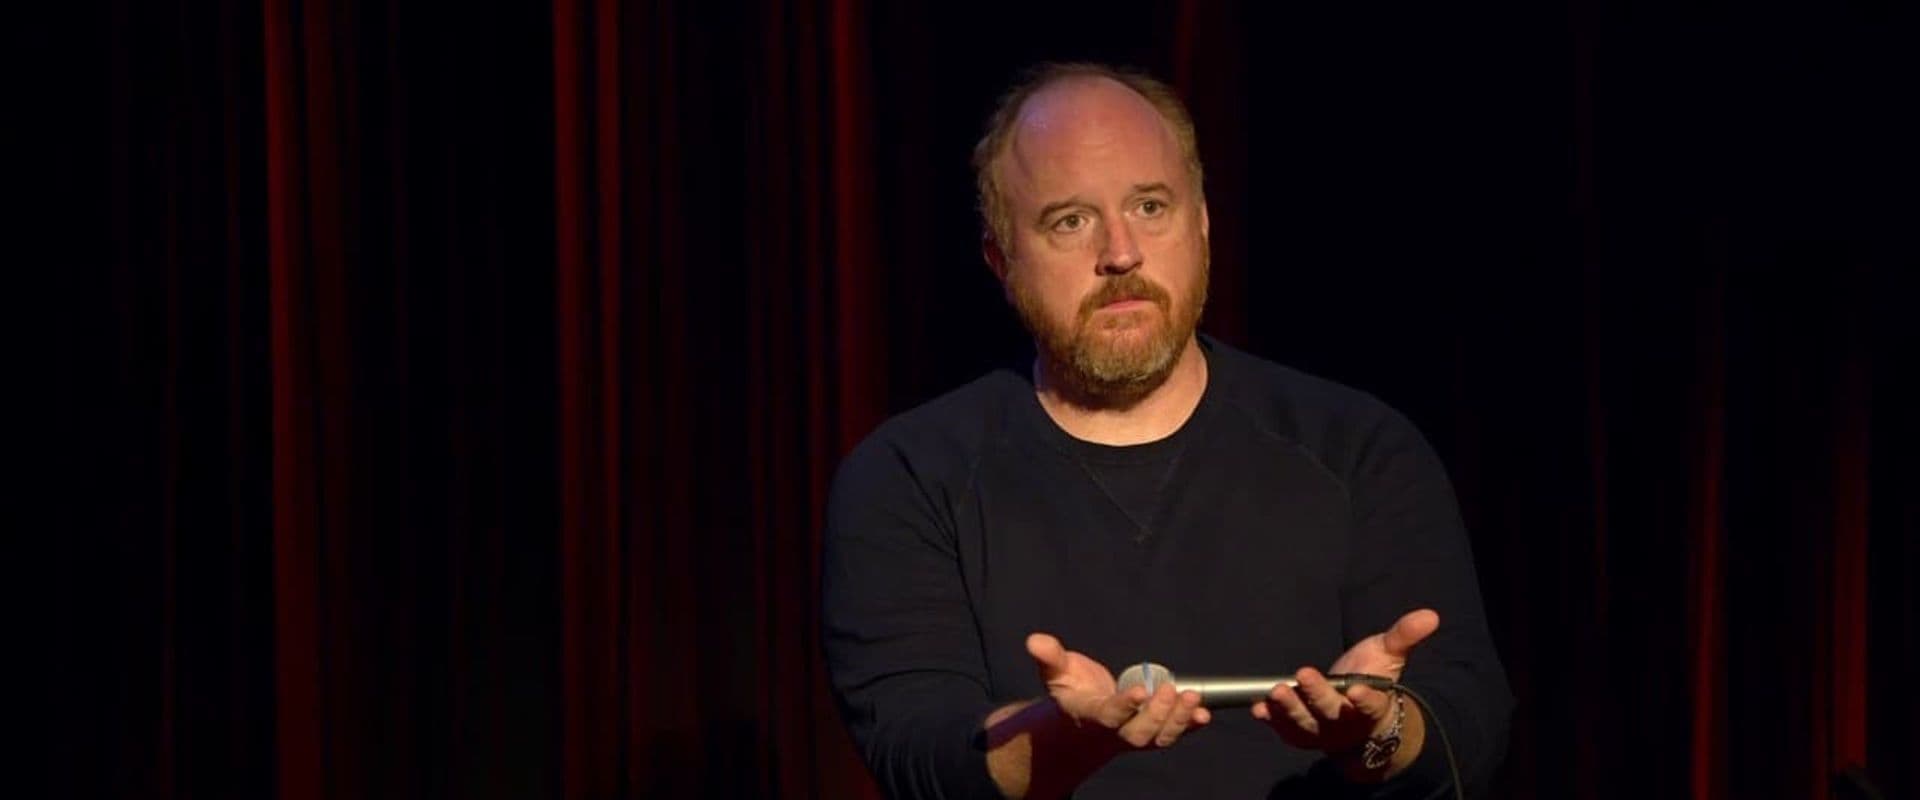 Louis C.K.: Live at The Comedy Store